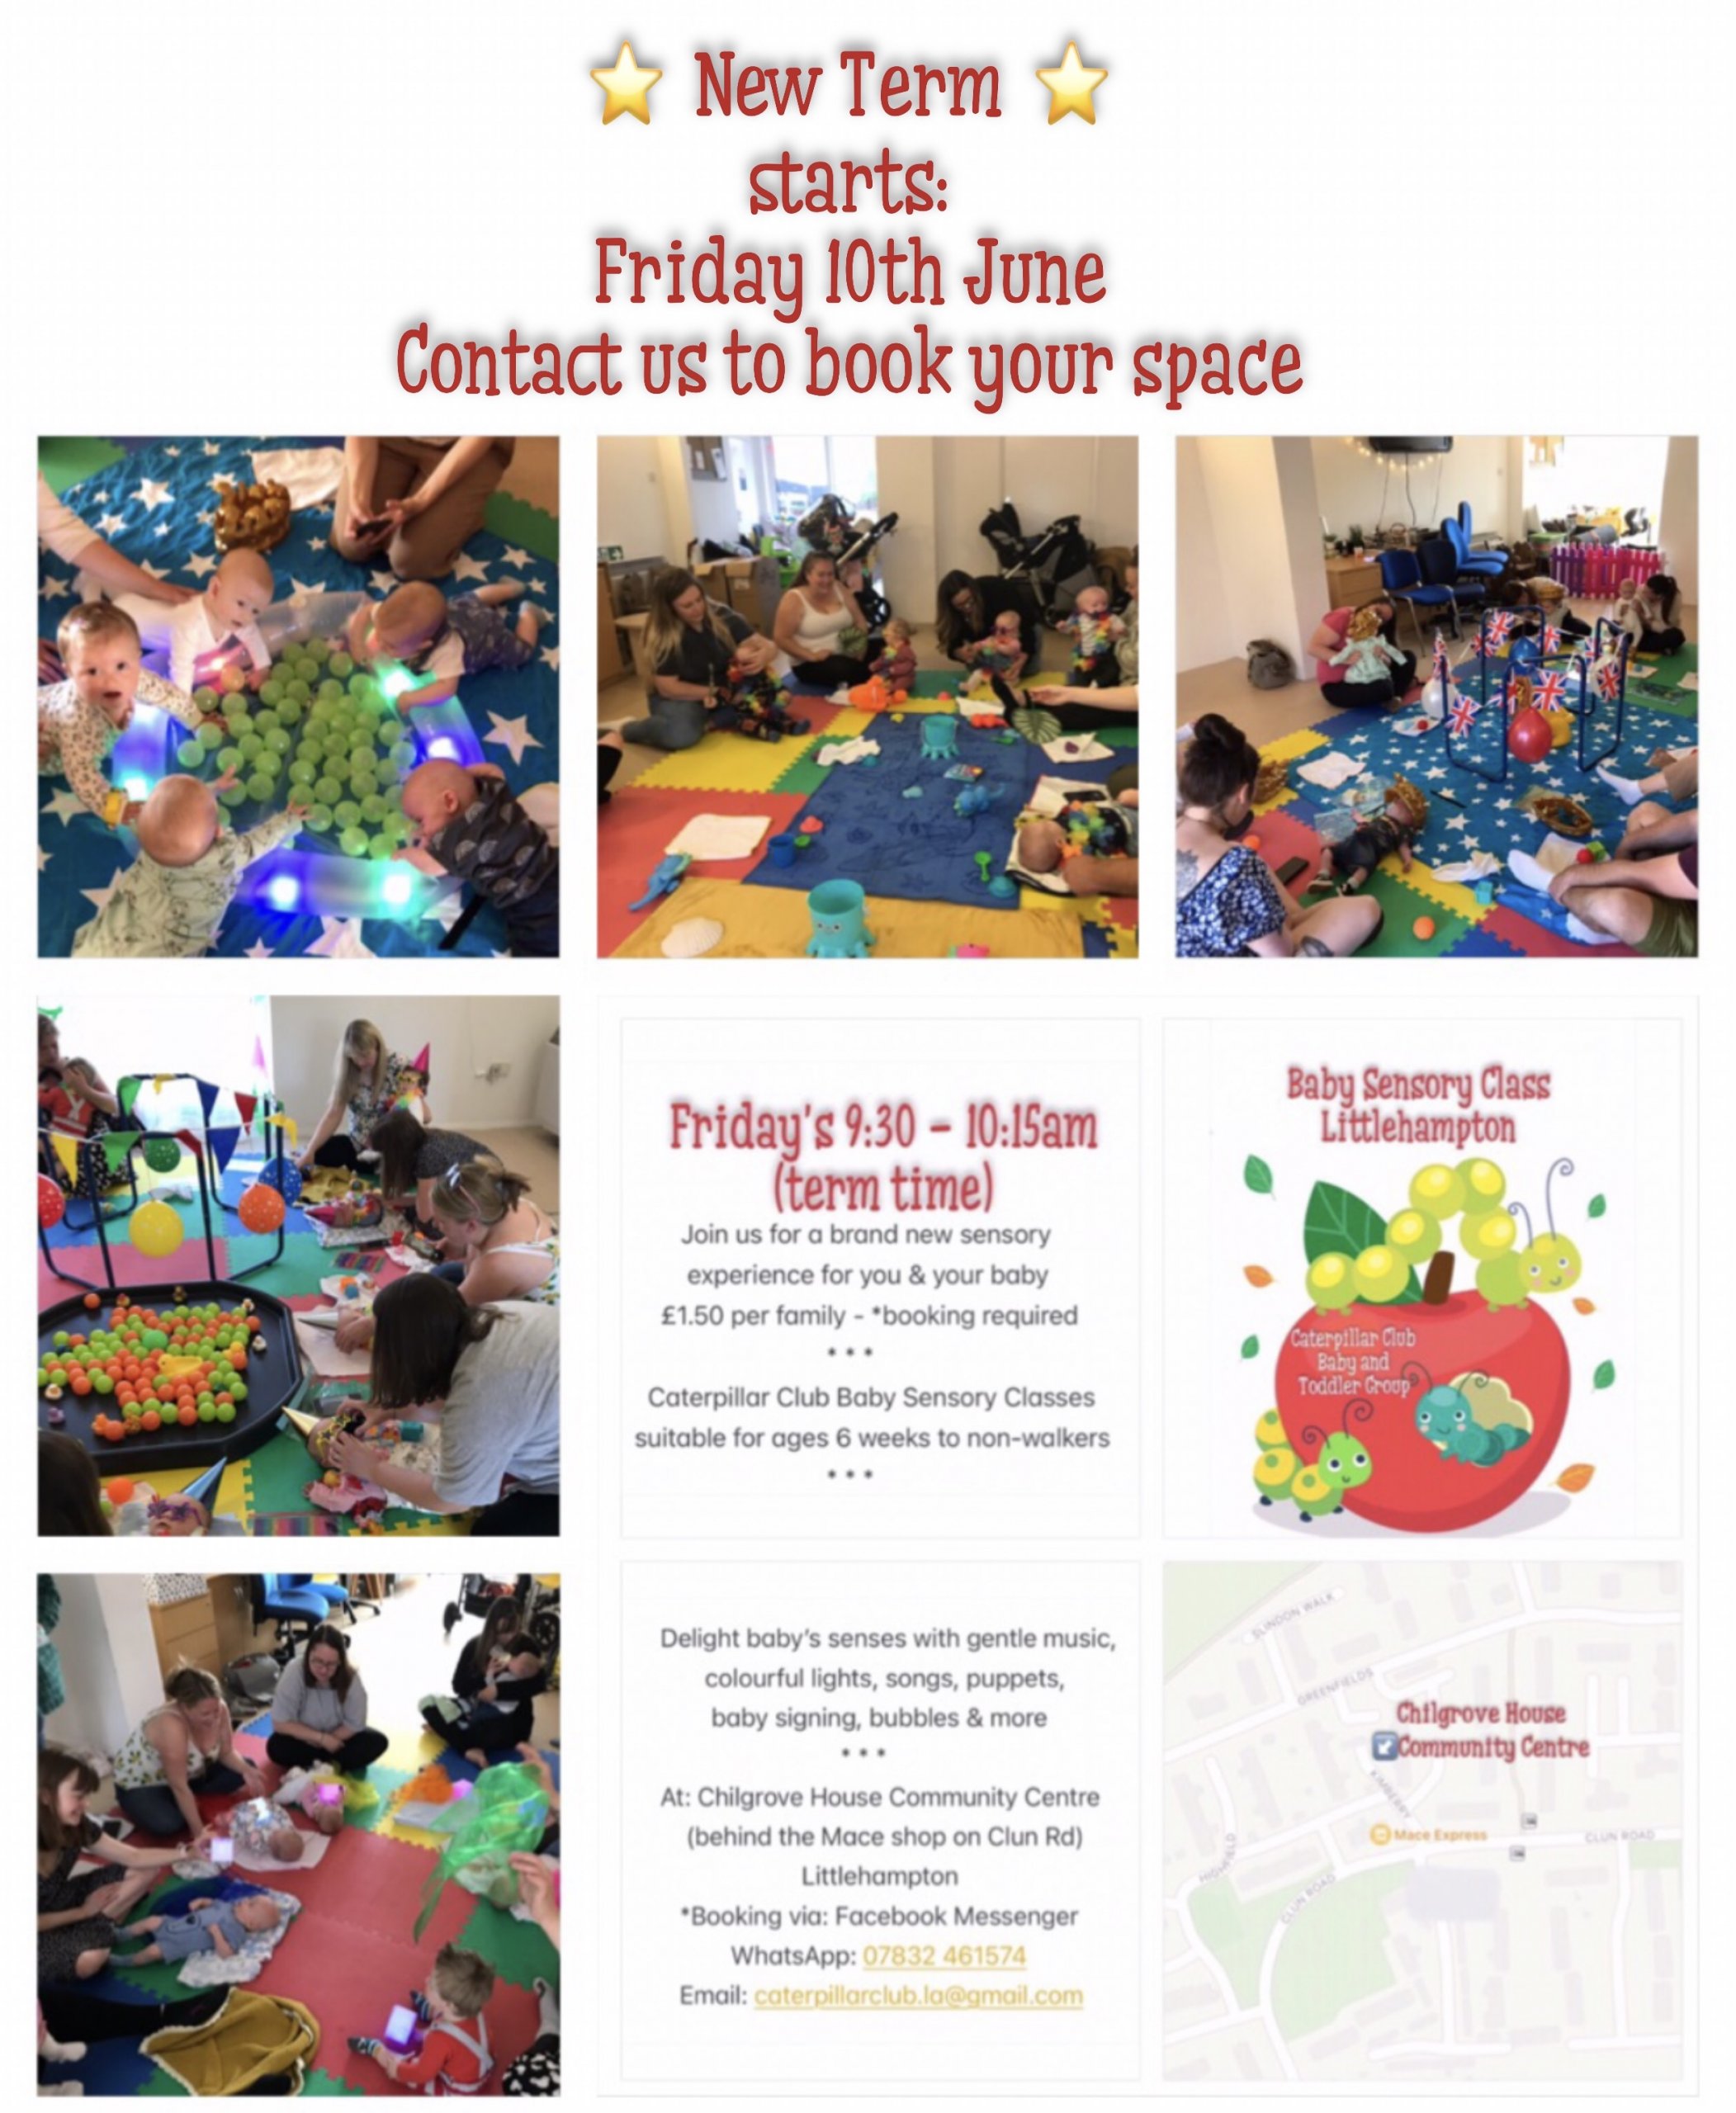 Caterpillar Club Baby and Toddler Group in Wick